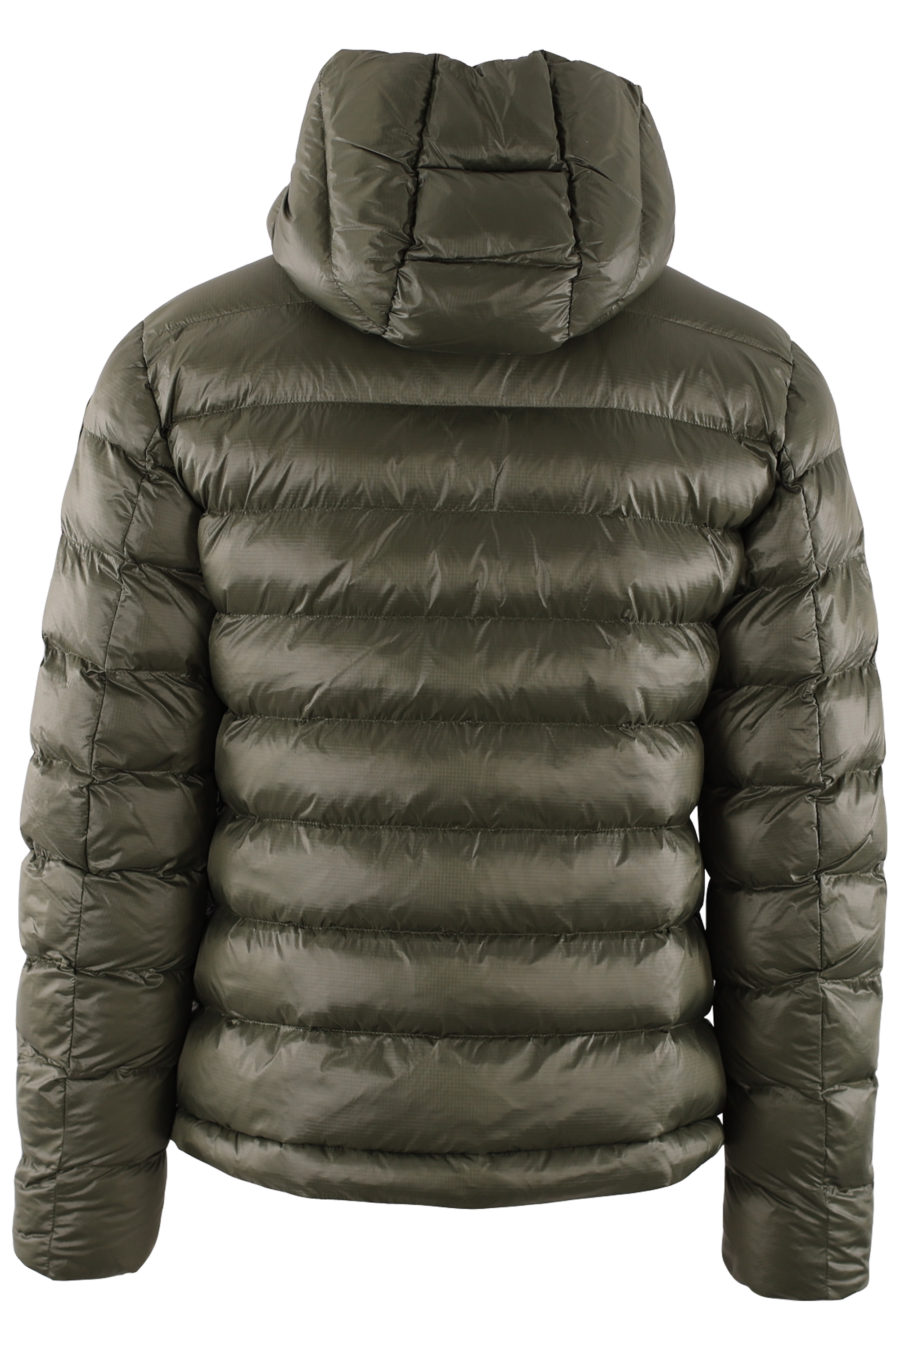 Green quilted down jacket with ecological filling - IMG 9386